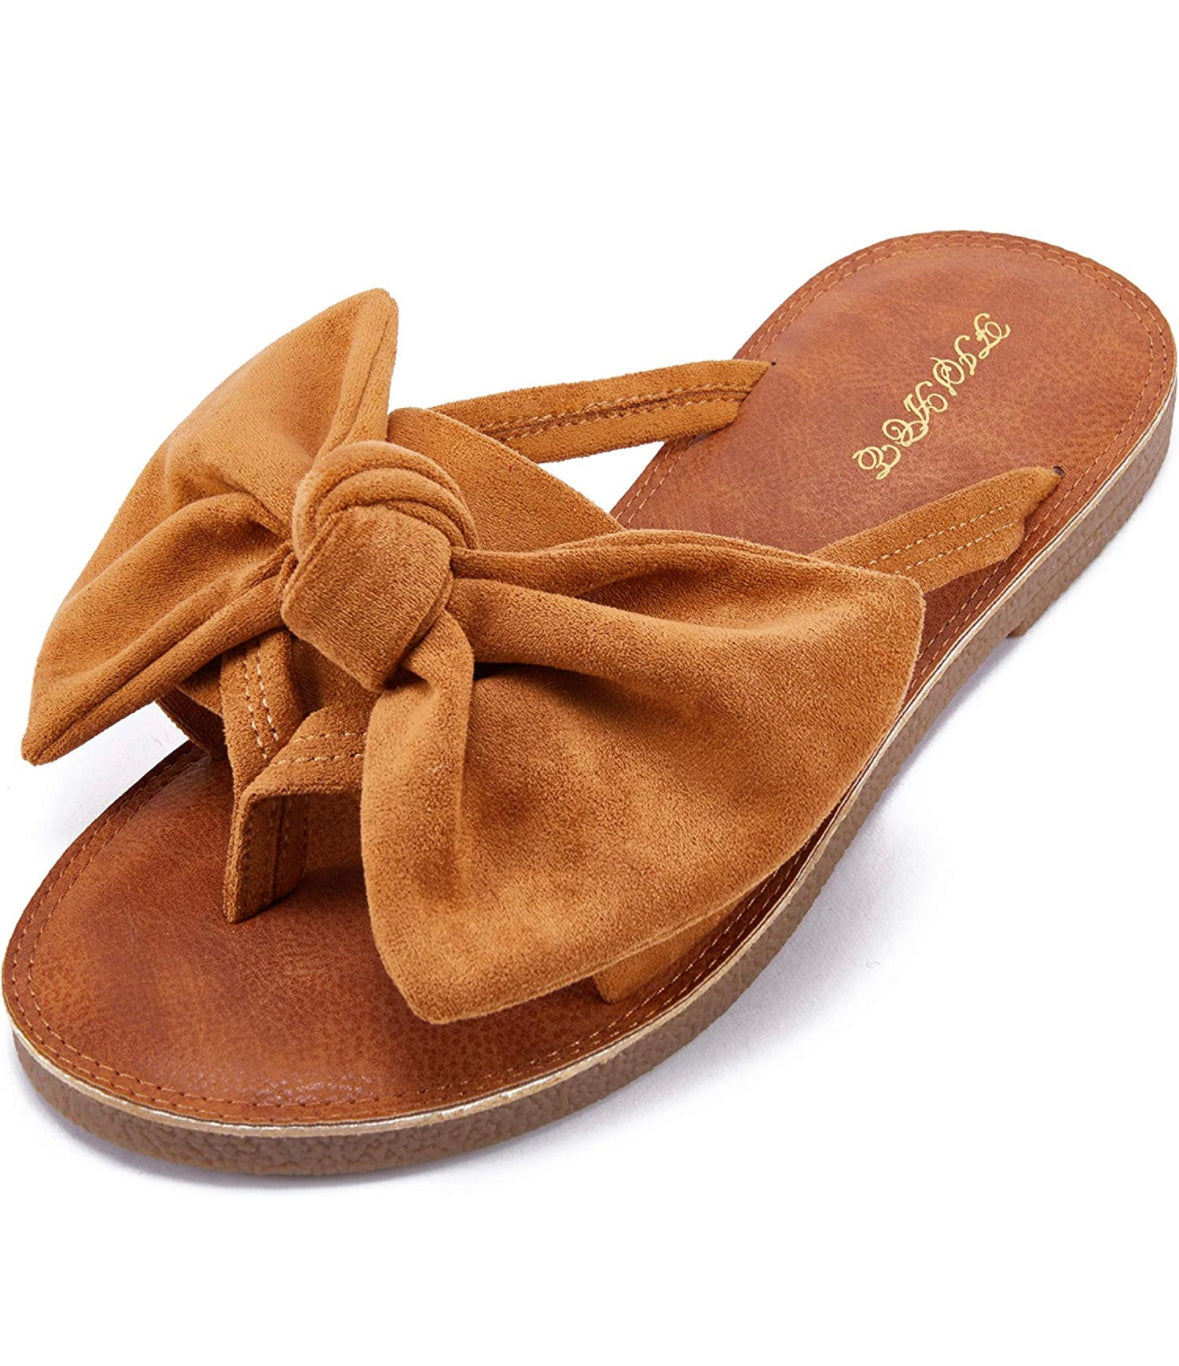 Fisace Brown Bow Sandal Size 9.5